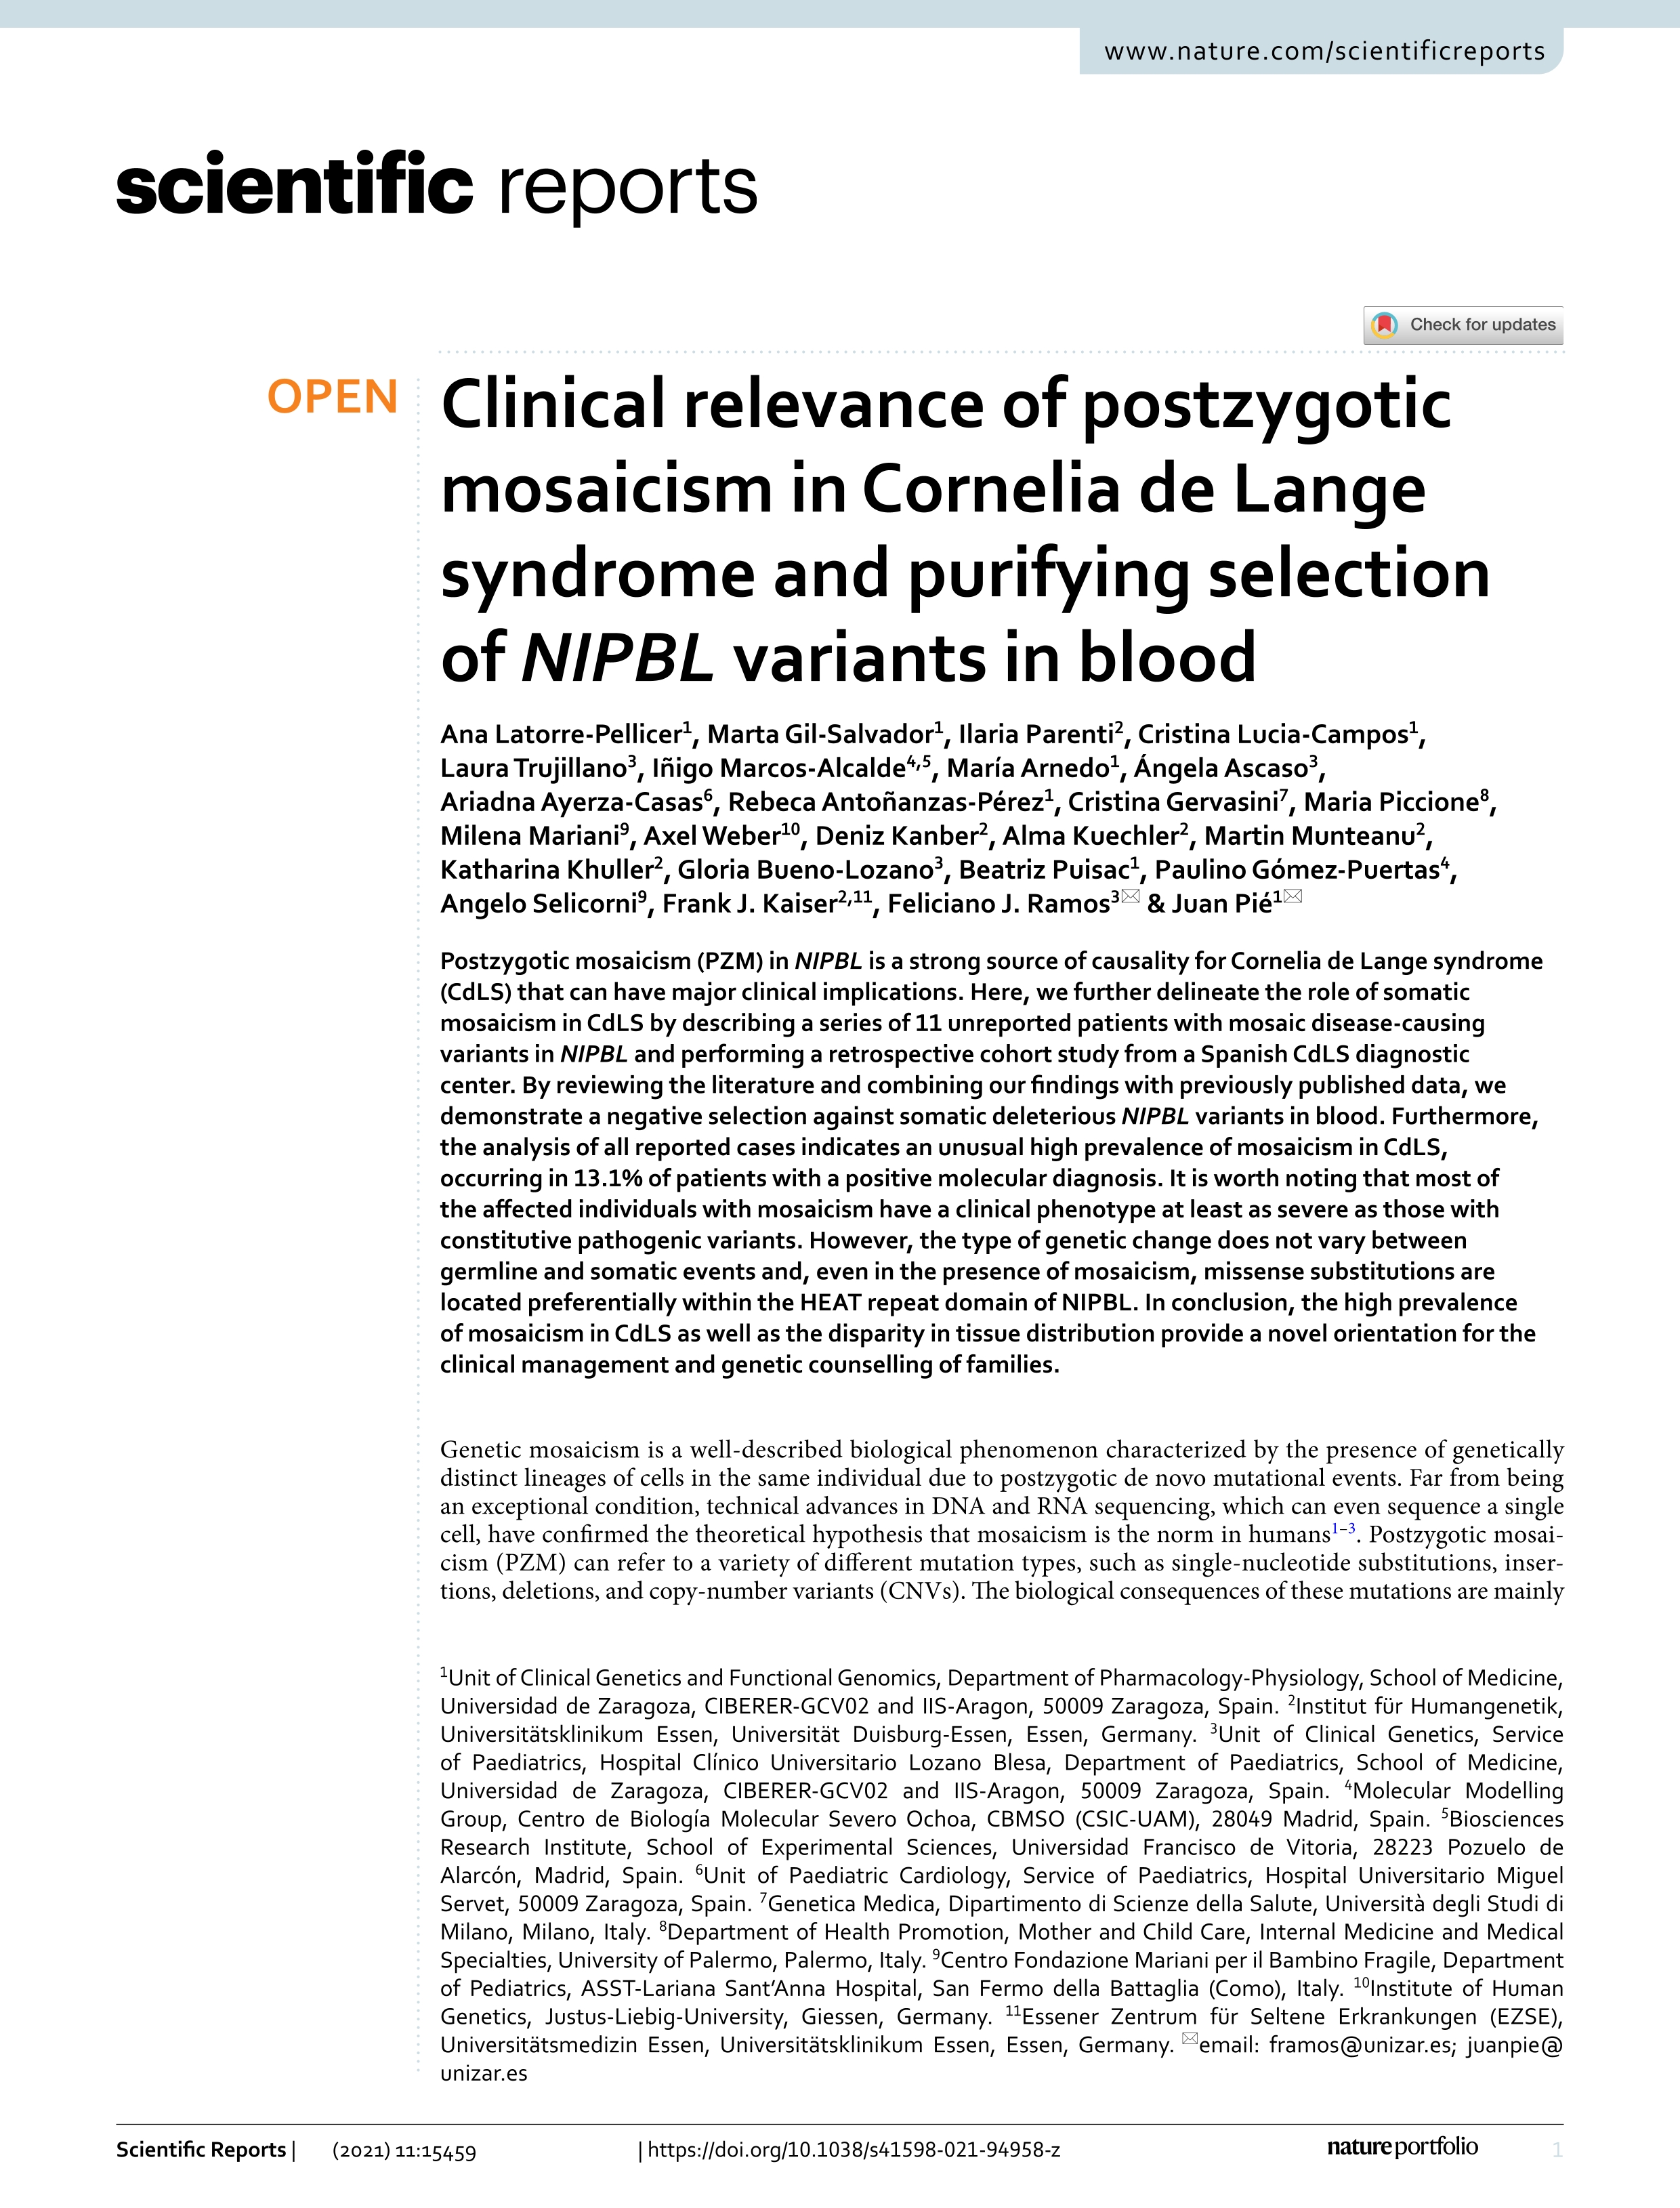 Clinical relevance of postzygotic mosaicism in Cornelia de Lange syndrome and purifying selection of NIPBL variants in blood